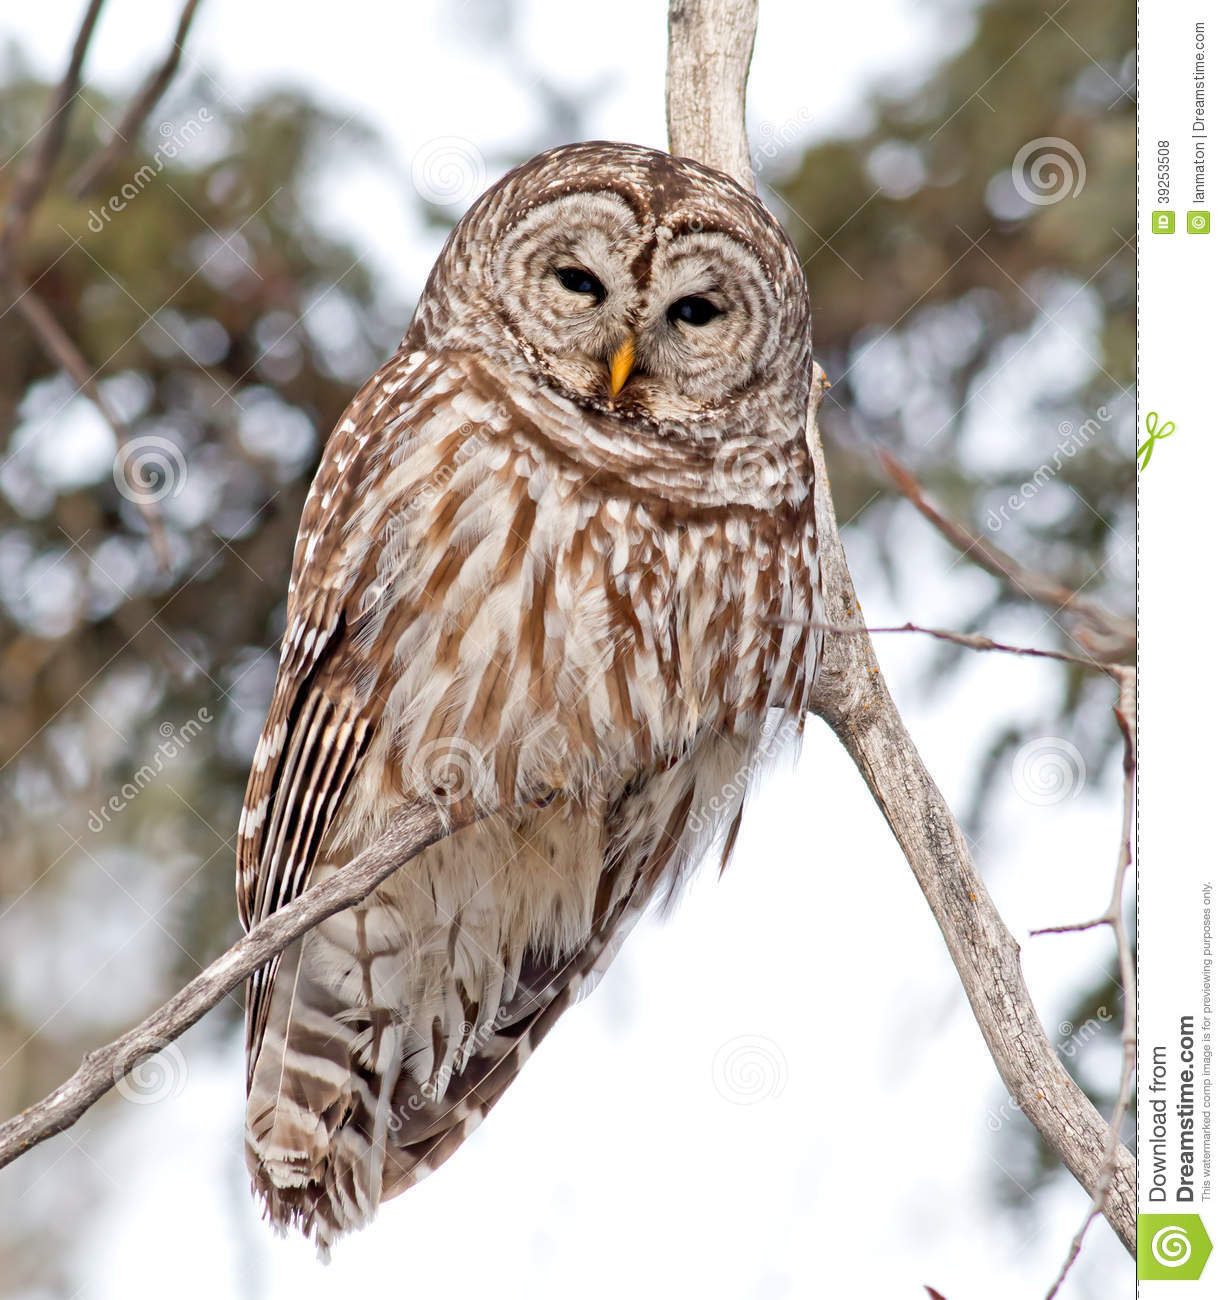 Barred Owl clipart #7, Download drawings